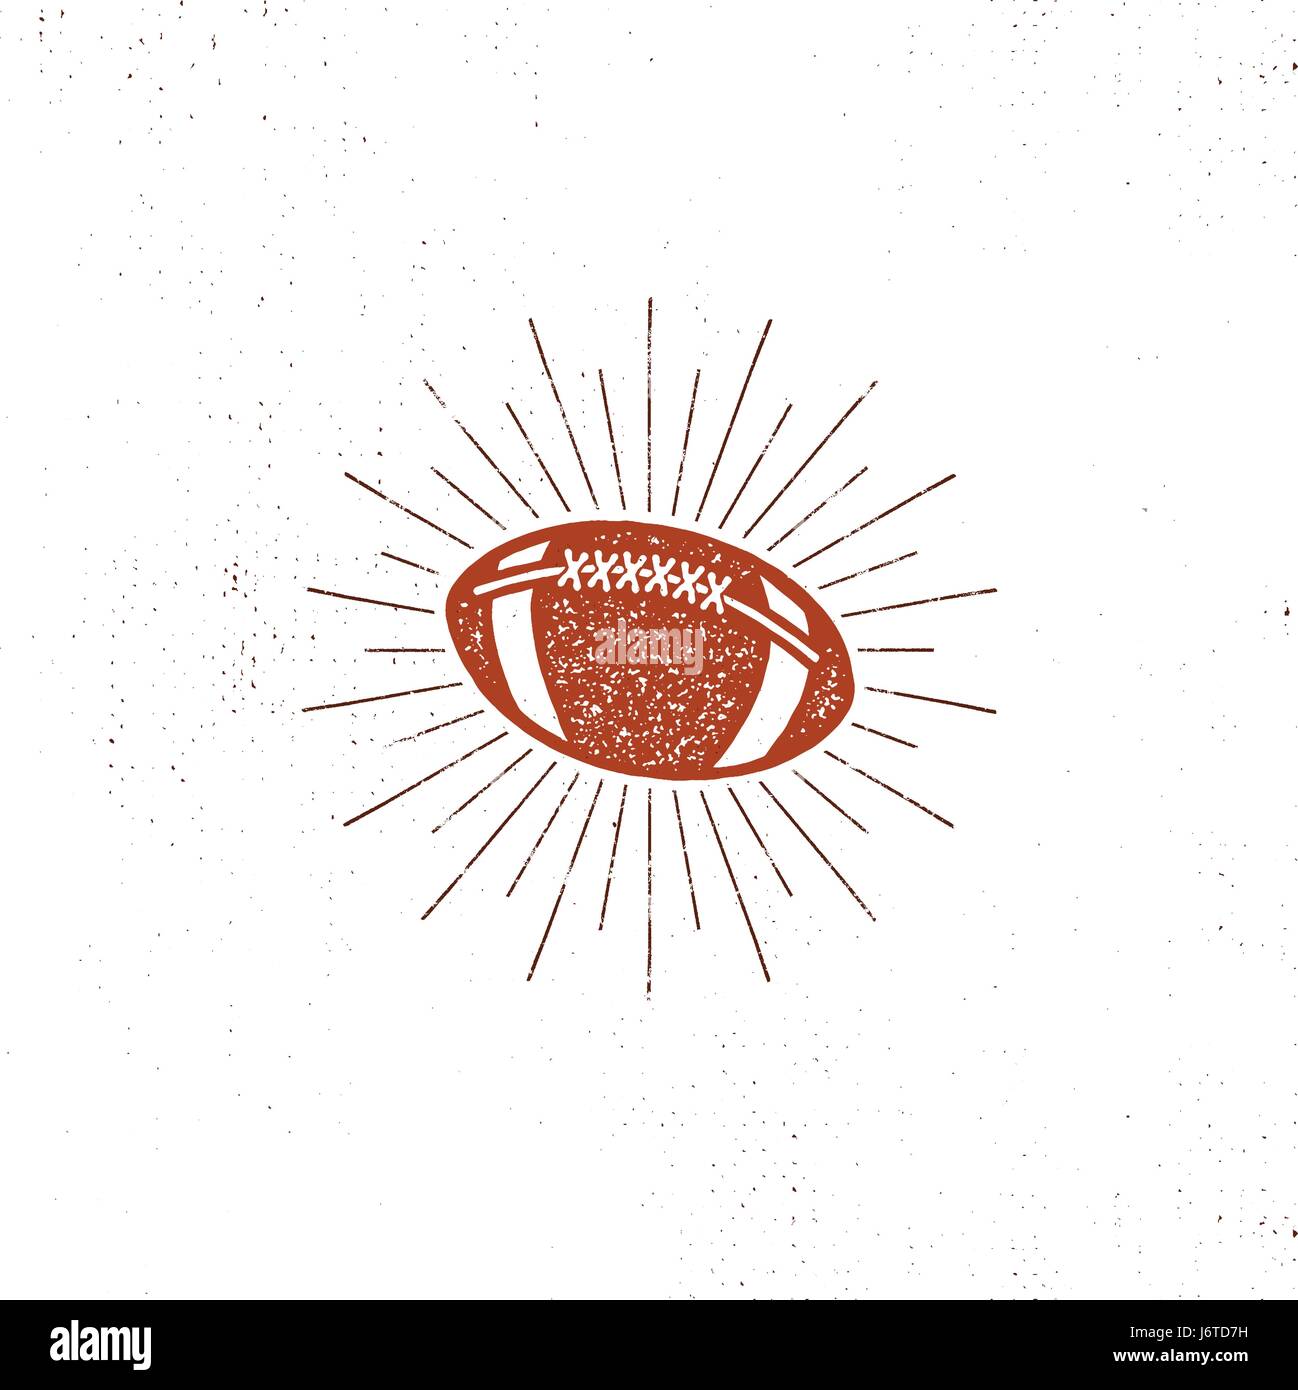 Vector american football bal illustration, icon. Retro design. Usa sports pictogram with sunbursts isolated on white background. Vector vintage style Stock Vector